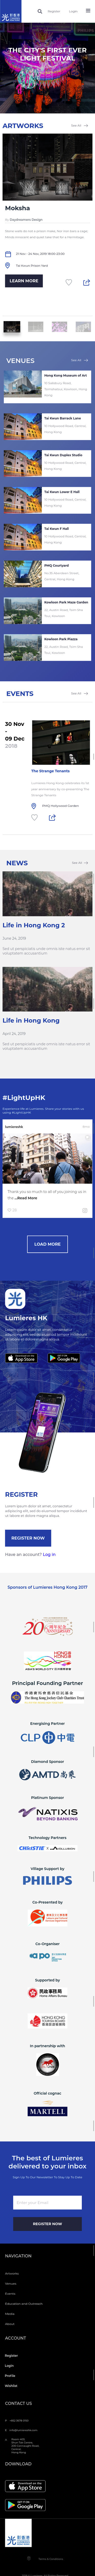 Lumieres HK Home Mobile page